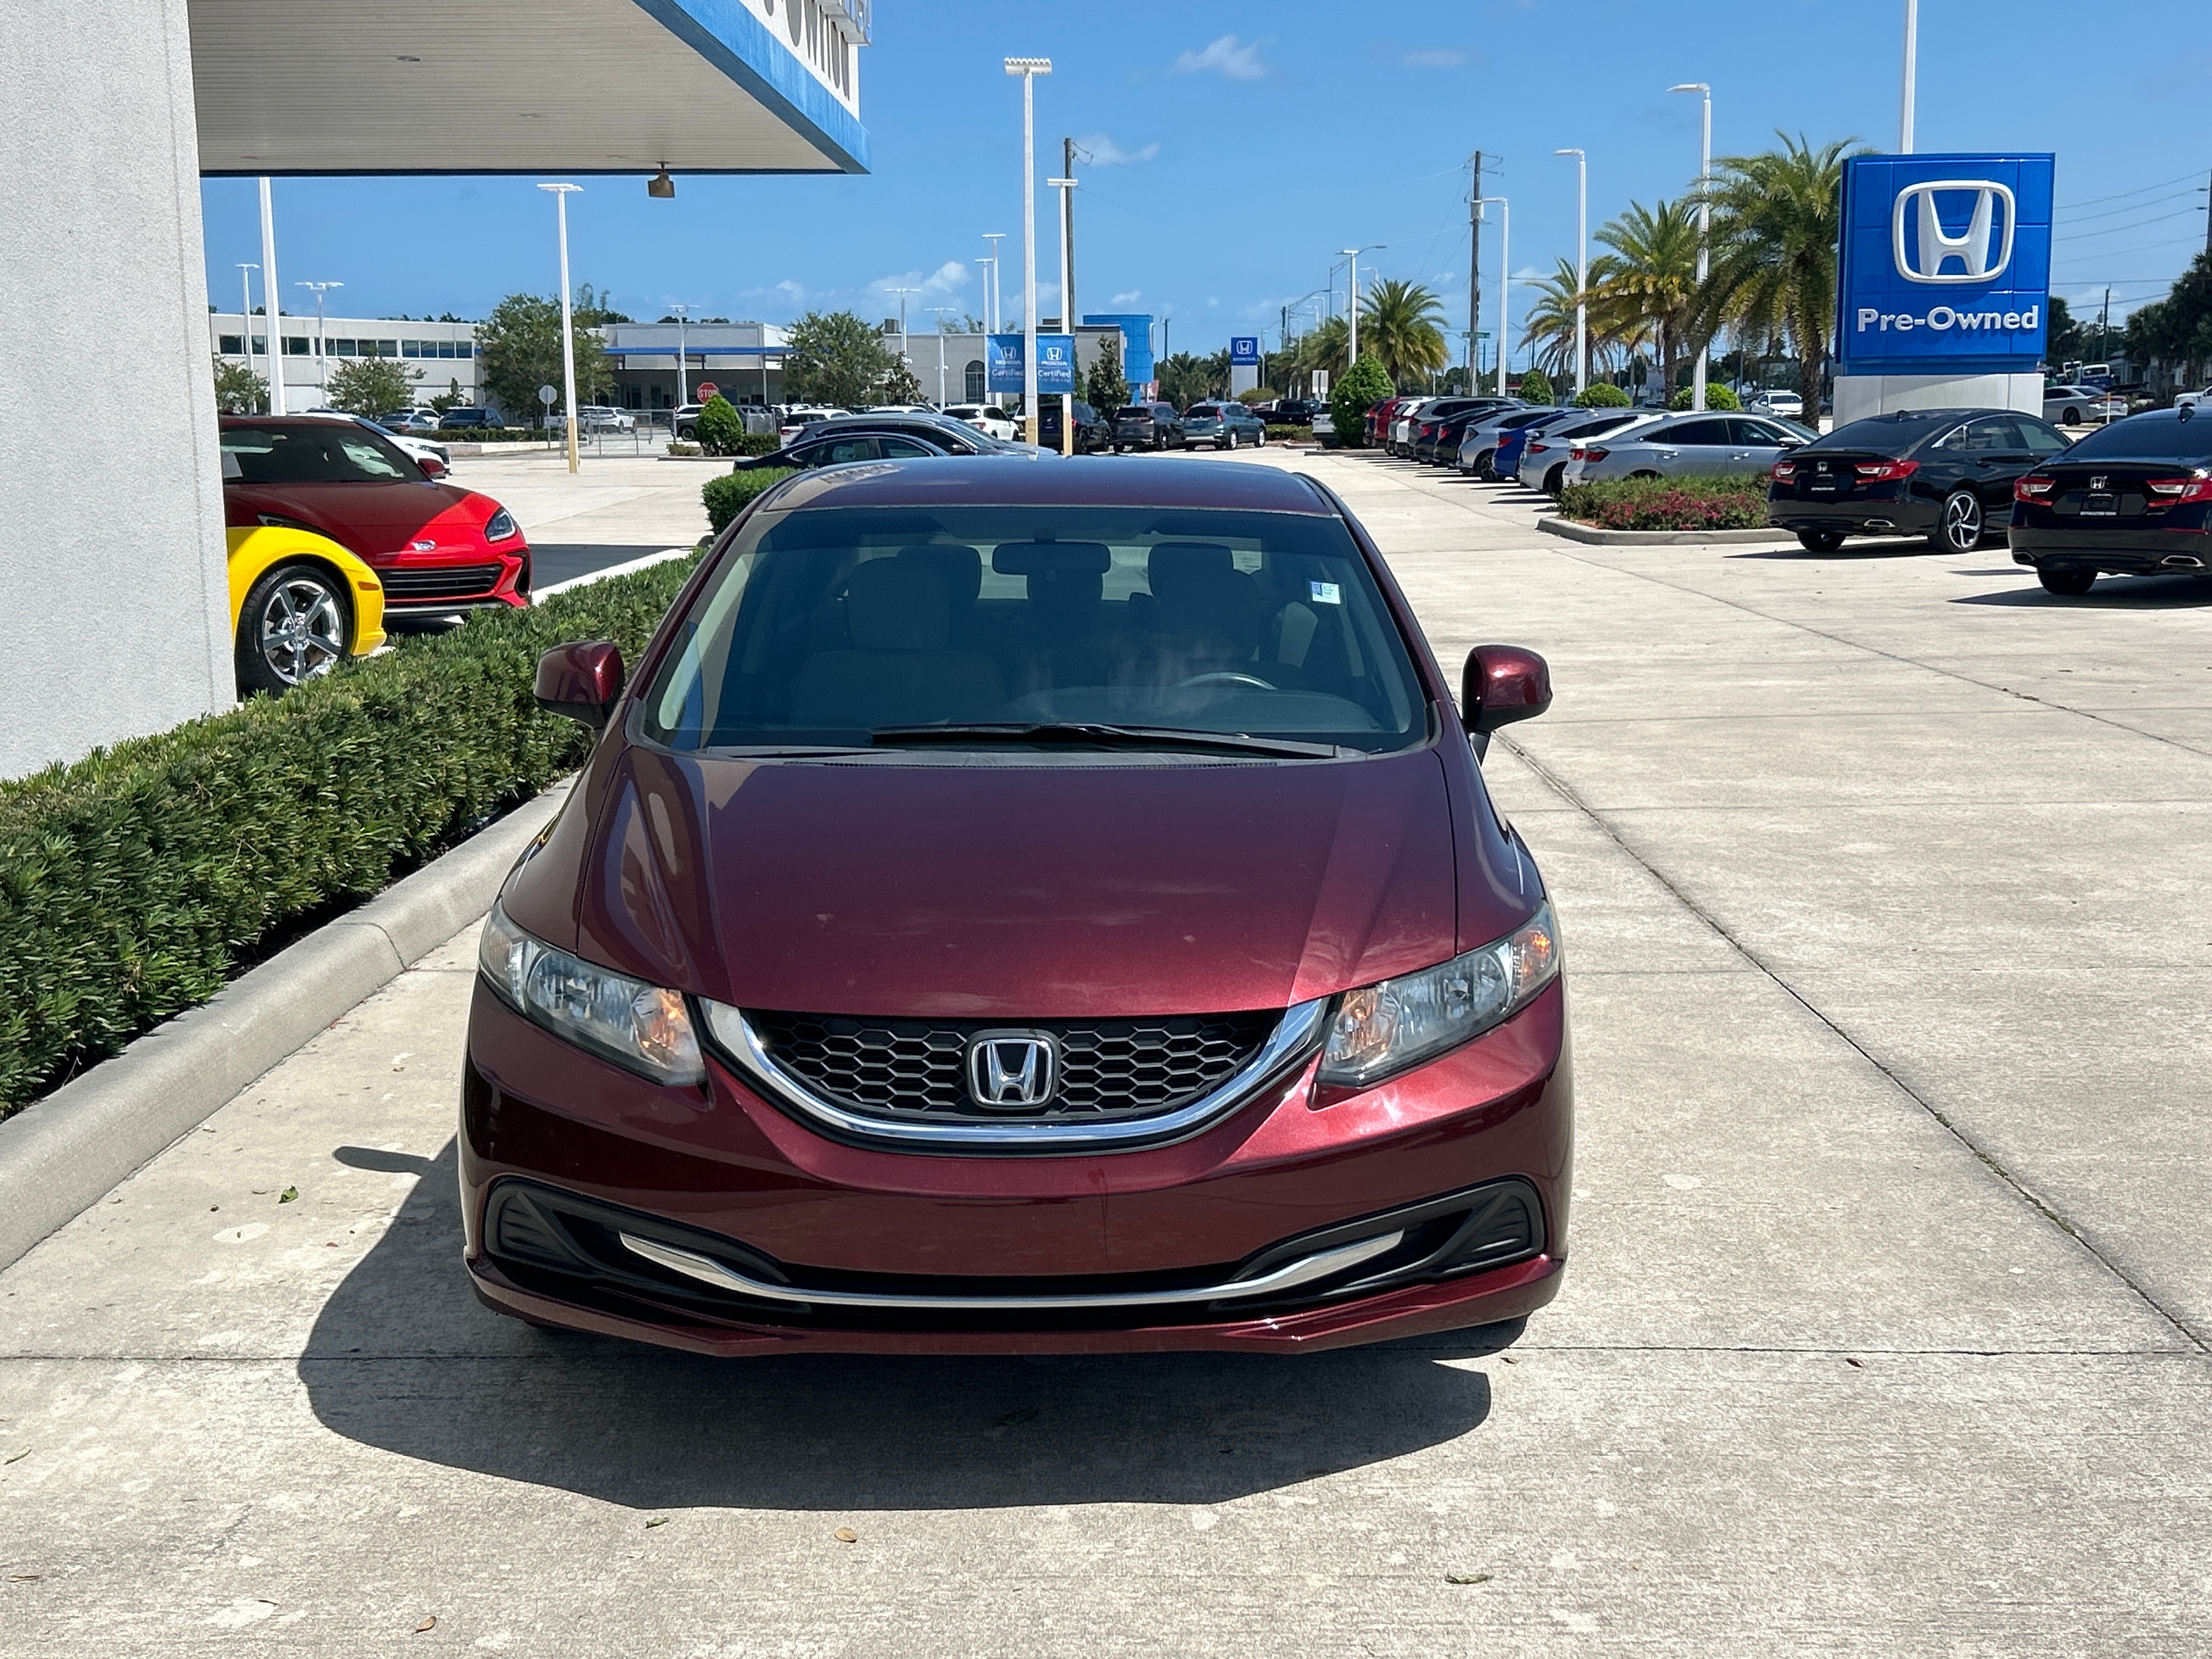 Used 2013 Honda Civic LX with VIN 19XFB2F50DE039705 for sale in Palm Bay, FL